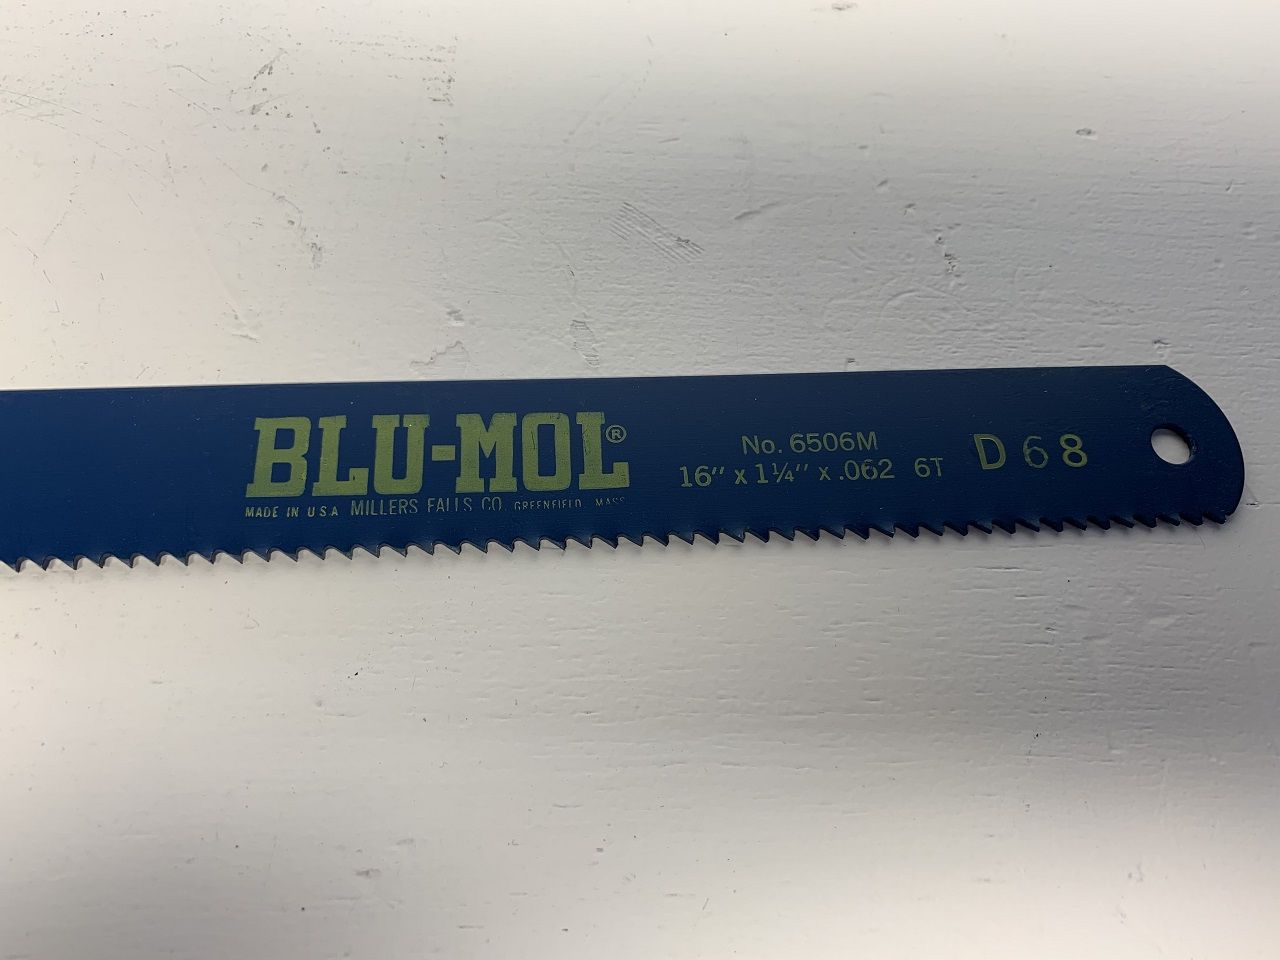 Spares & Accessories/SAW BAND BLU-MOL TYPE 400x32x1.60 - 6 dents